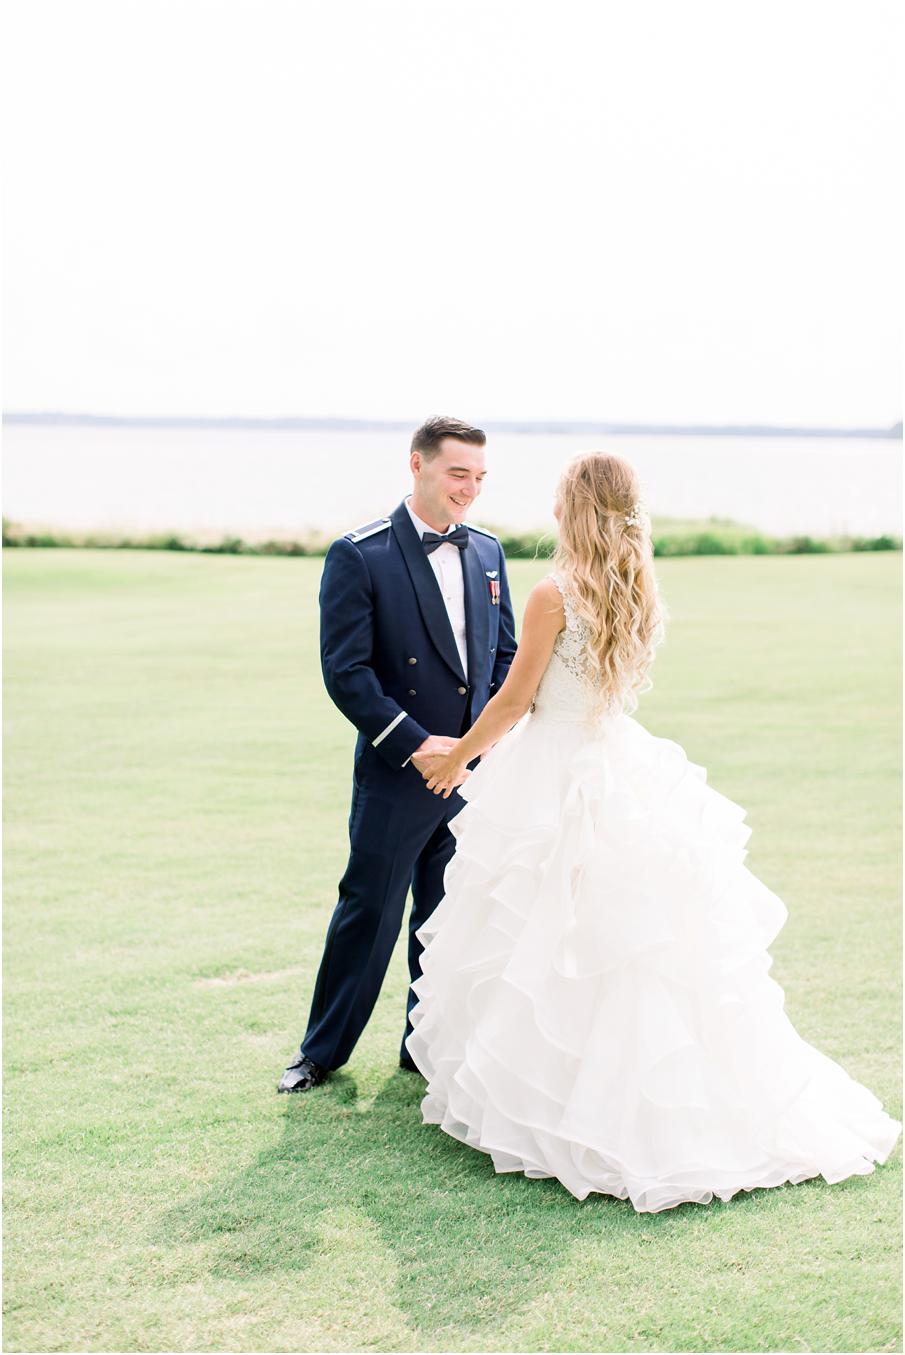 First look between bride and groom at Two Rivers Country Club